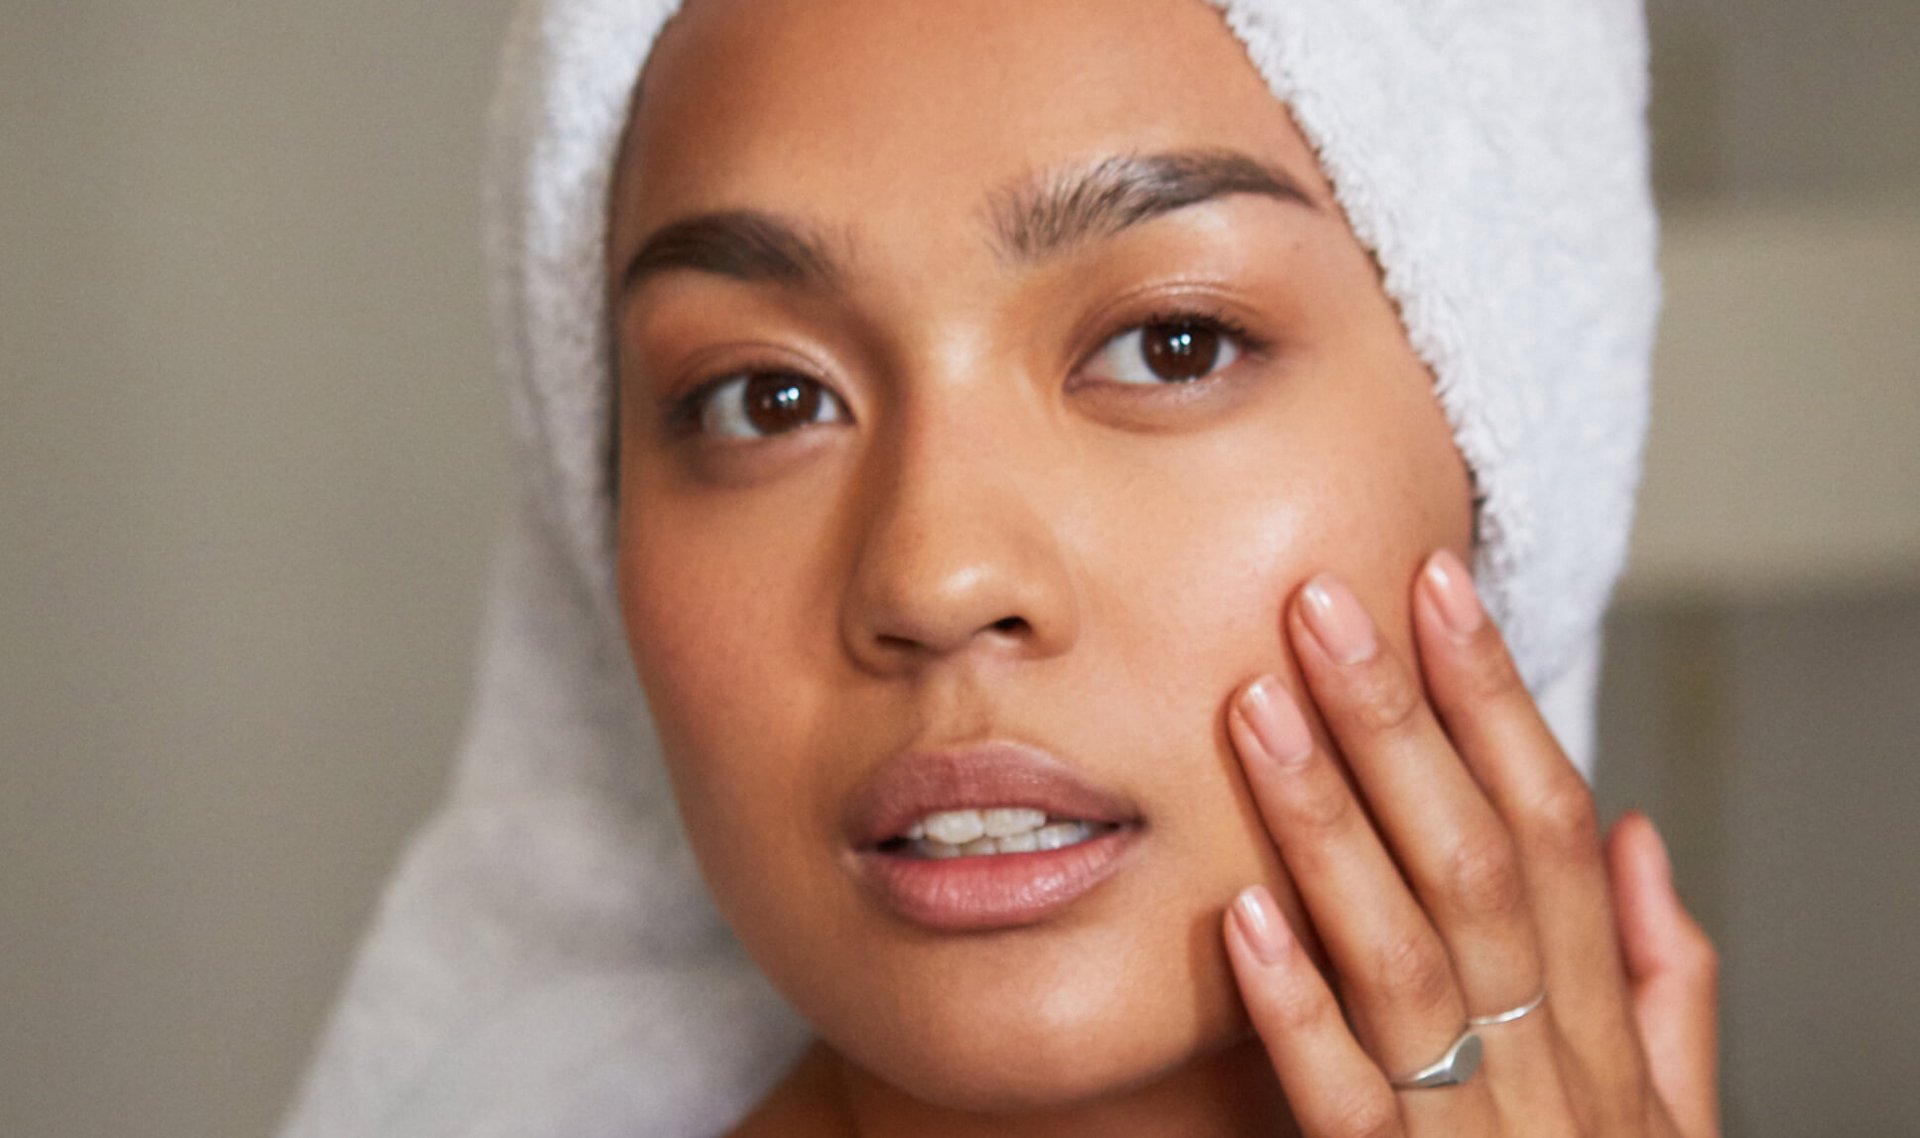 How to Treat Acne Scars — According to a Dermatologist